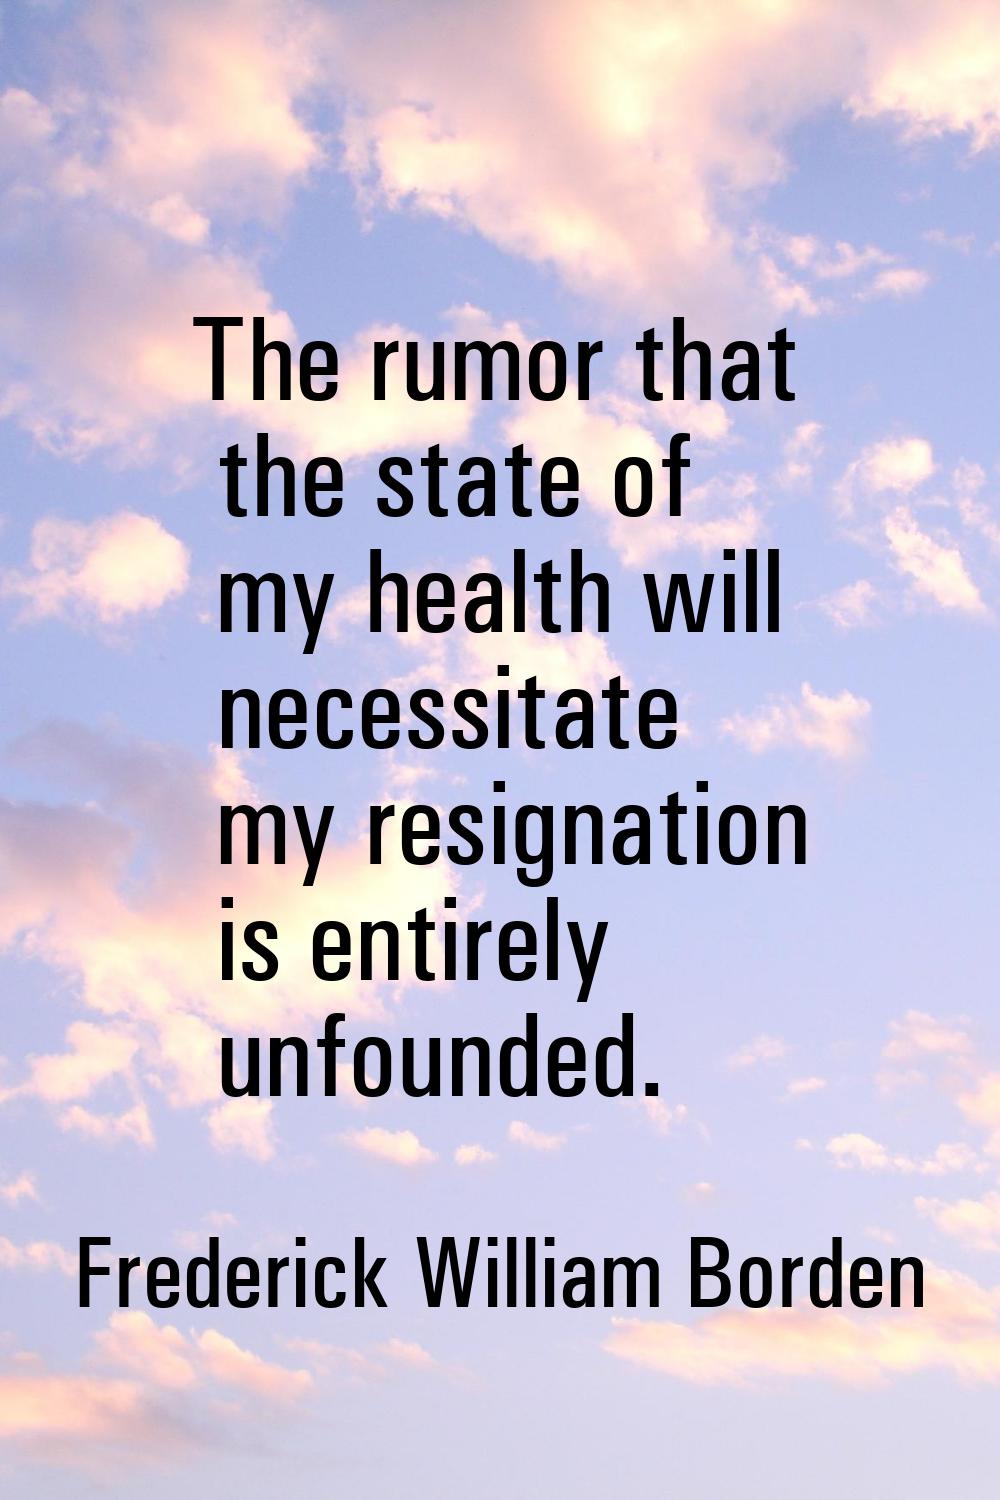 The rumor that the state of my health will necessitate my resignation is entirely unfounded.